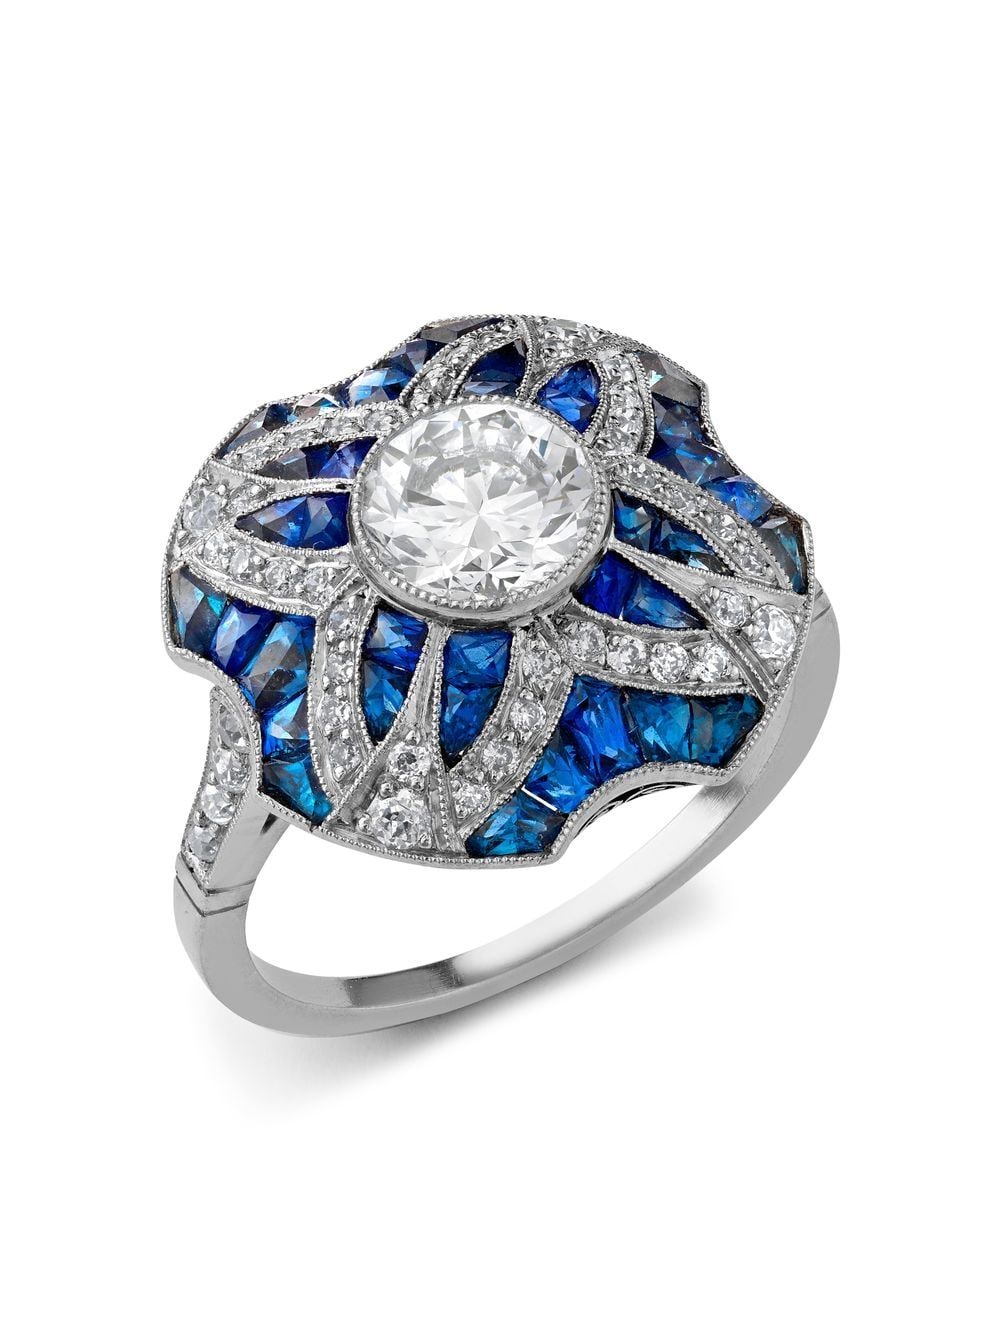 Pre-owned Pragnell Vintage Platinum Art Deco Diamond And Sapphire Cocktail Ring In Silver